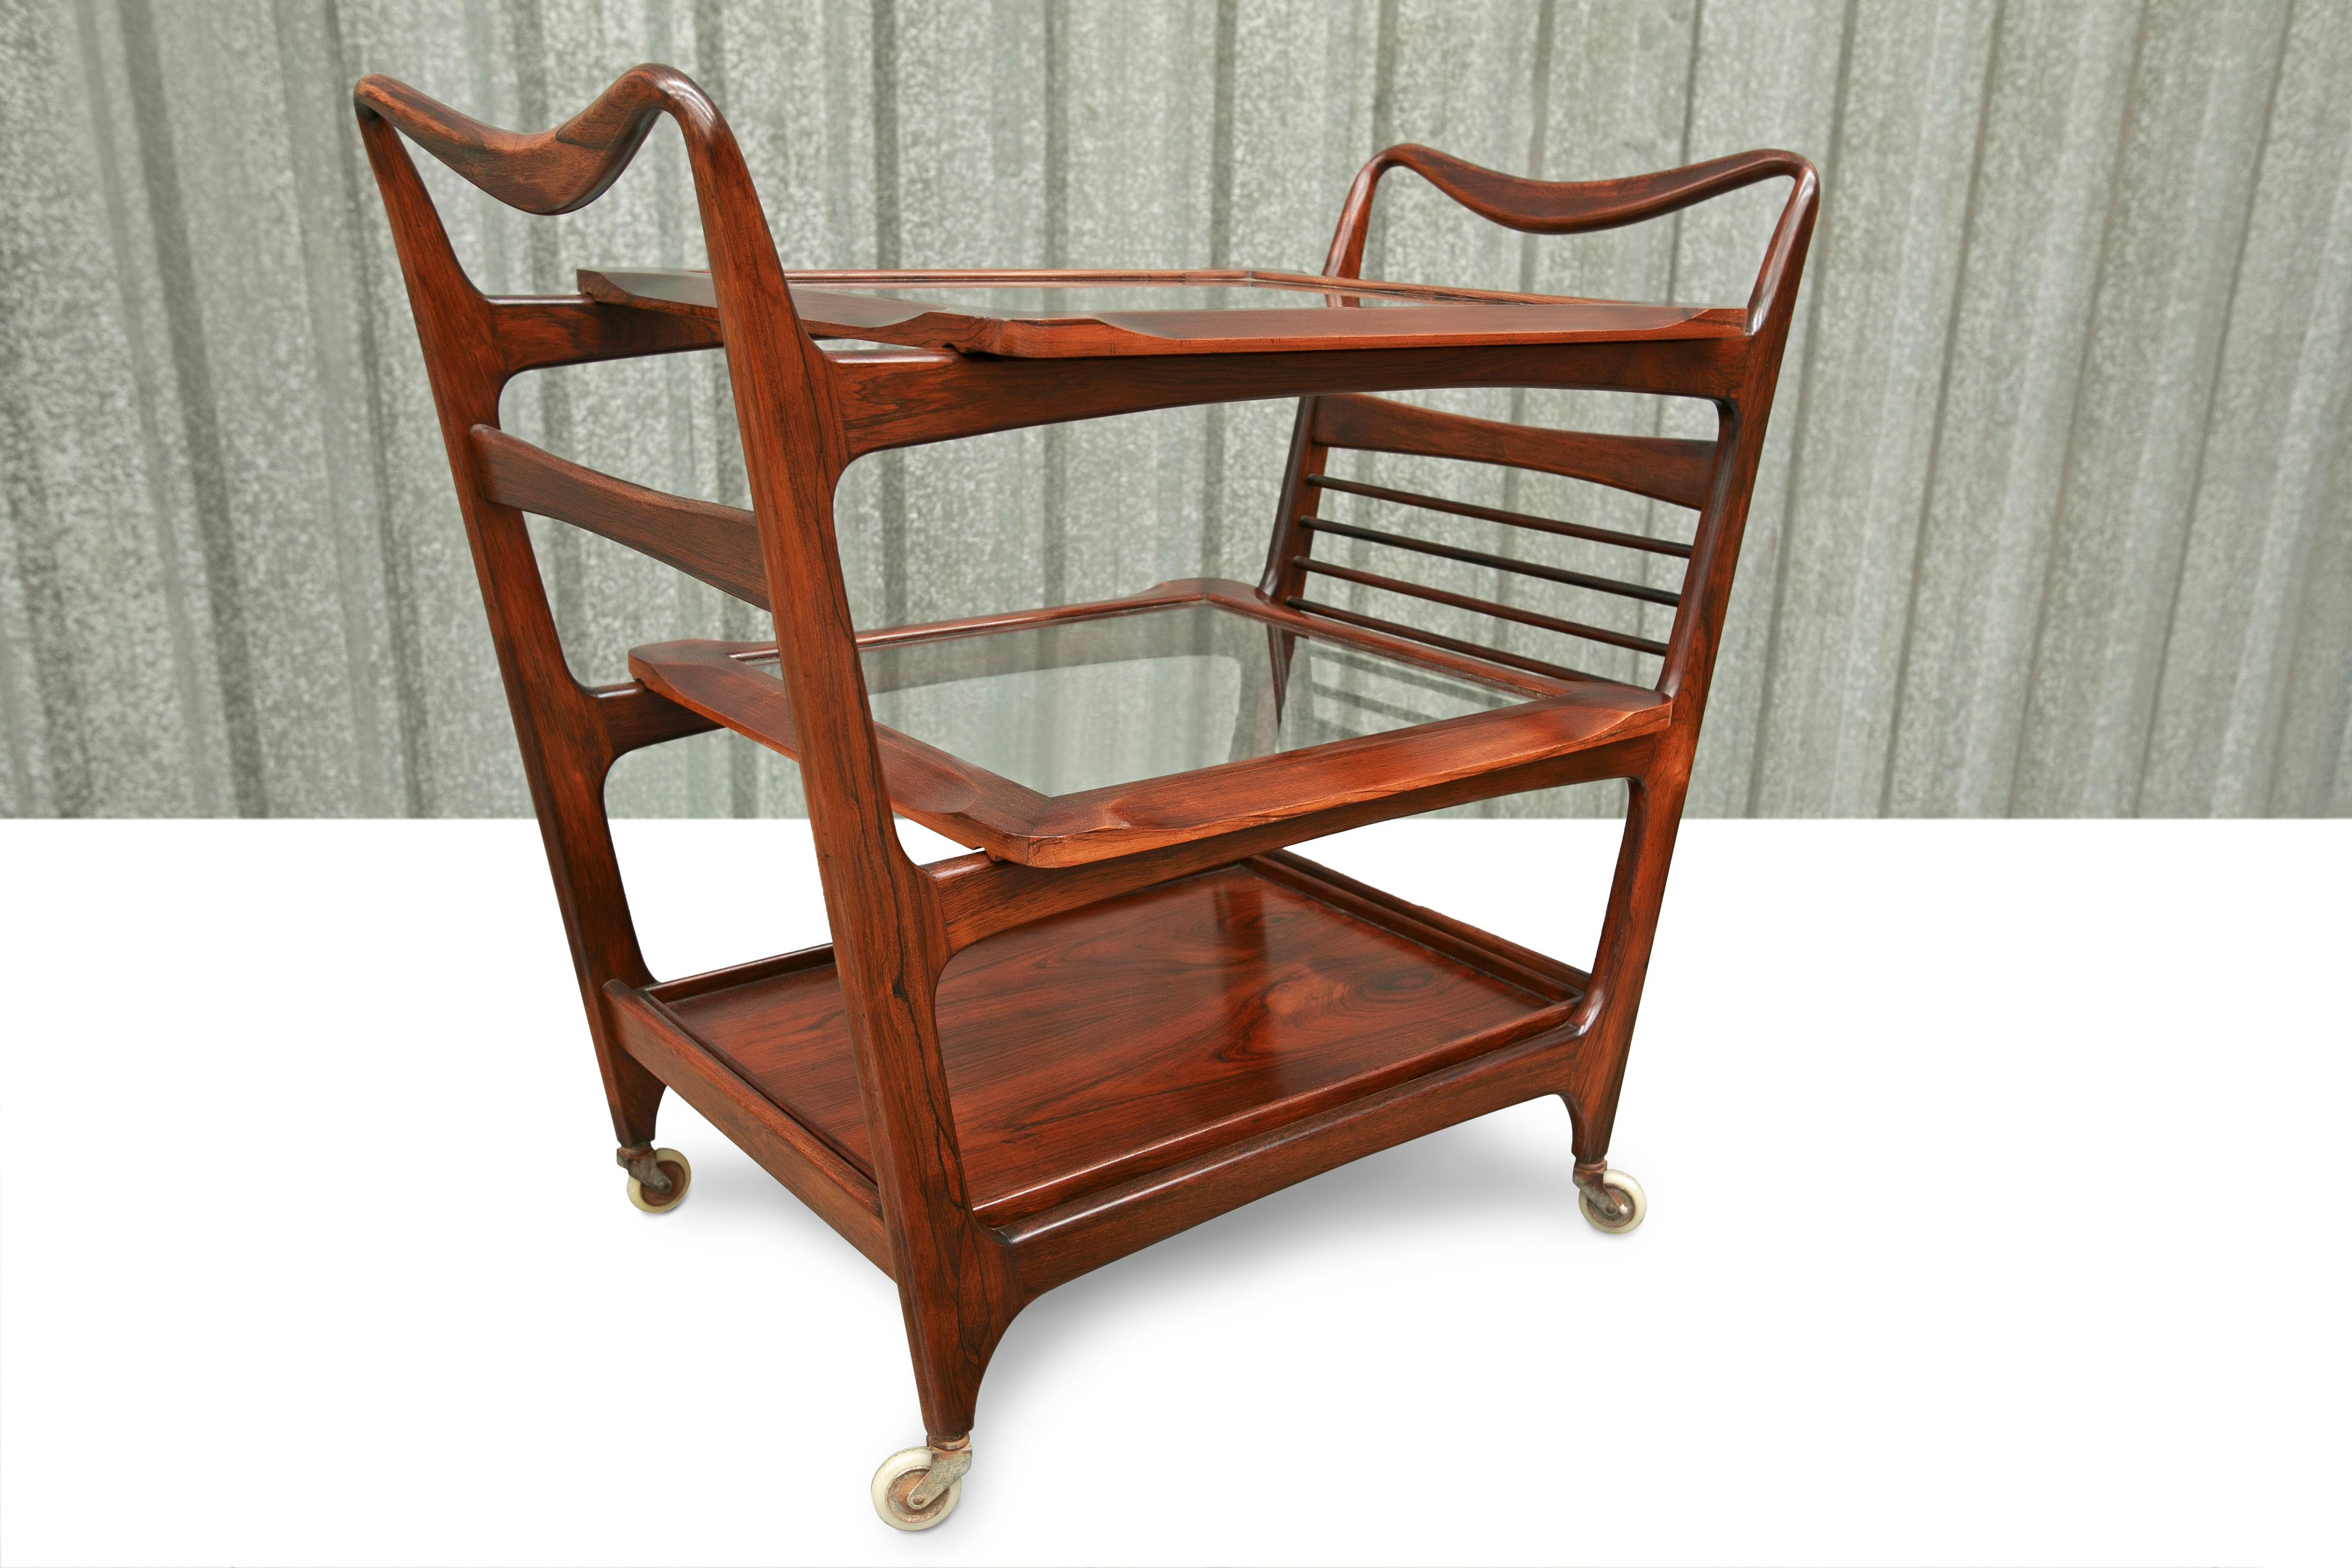 Available right now, this very Mid-Century Modern Bar Cart in Hardwood & Glass by Carlo Hauner & Martin Eisler, designed in Brazil in the sixties is nothing less than spectacular! 

The bar cart features a wood structure in solid rosewood with its